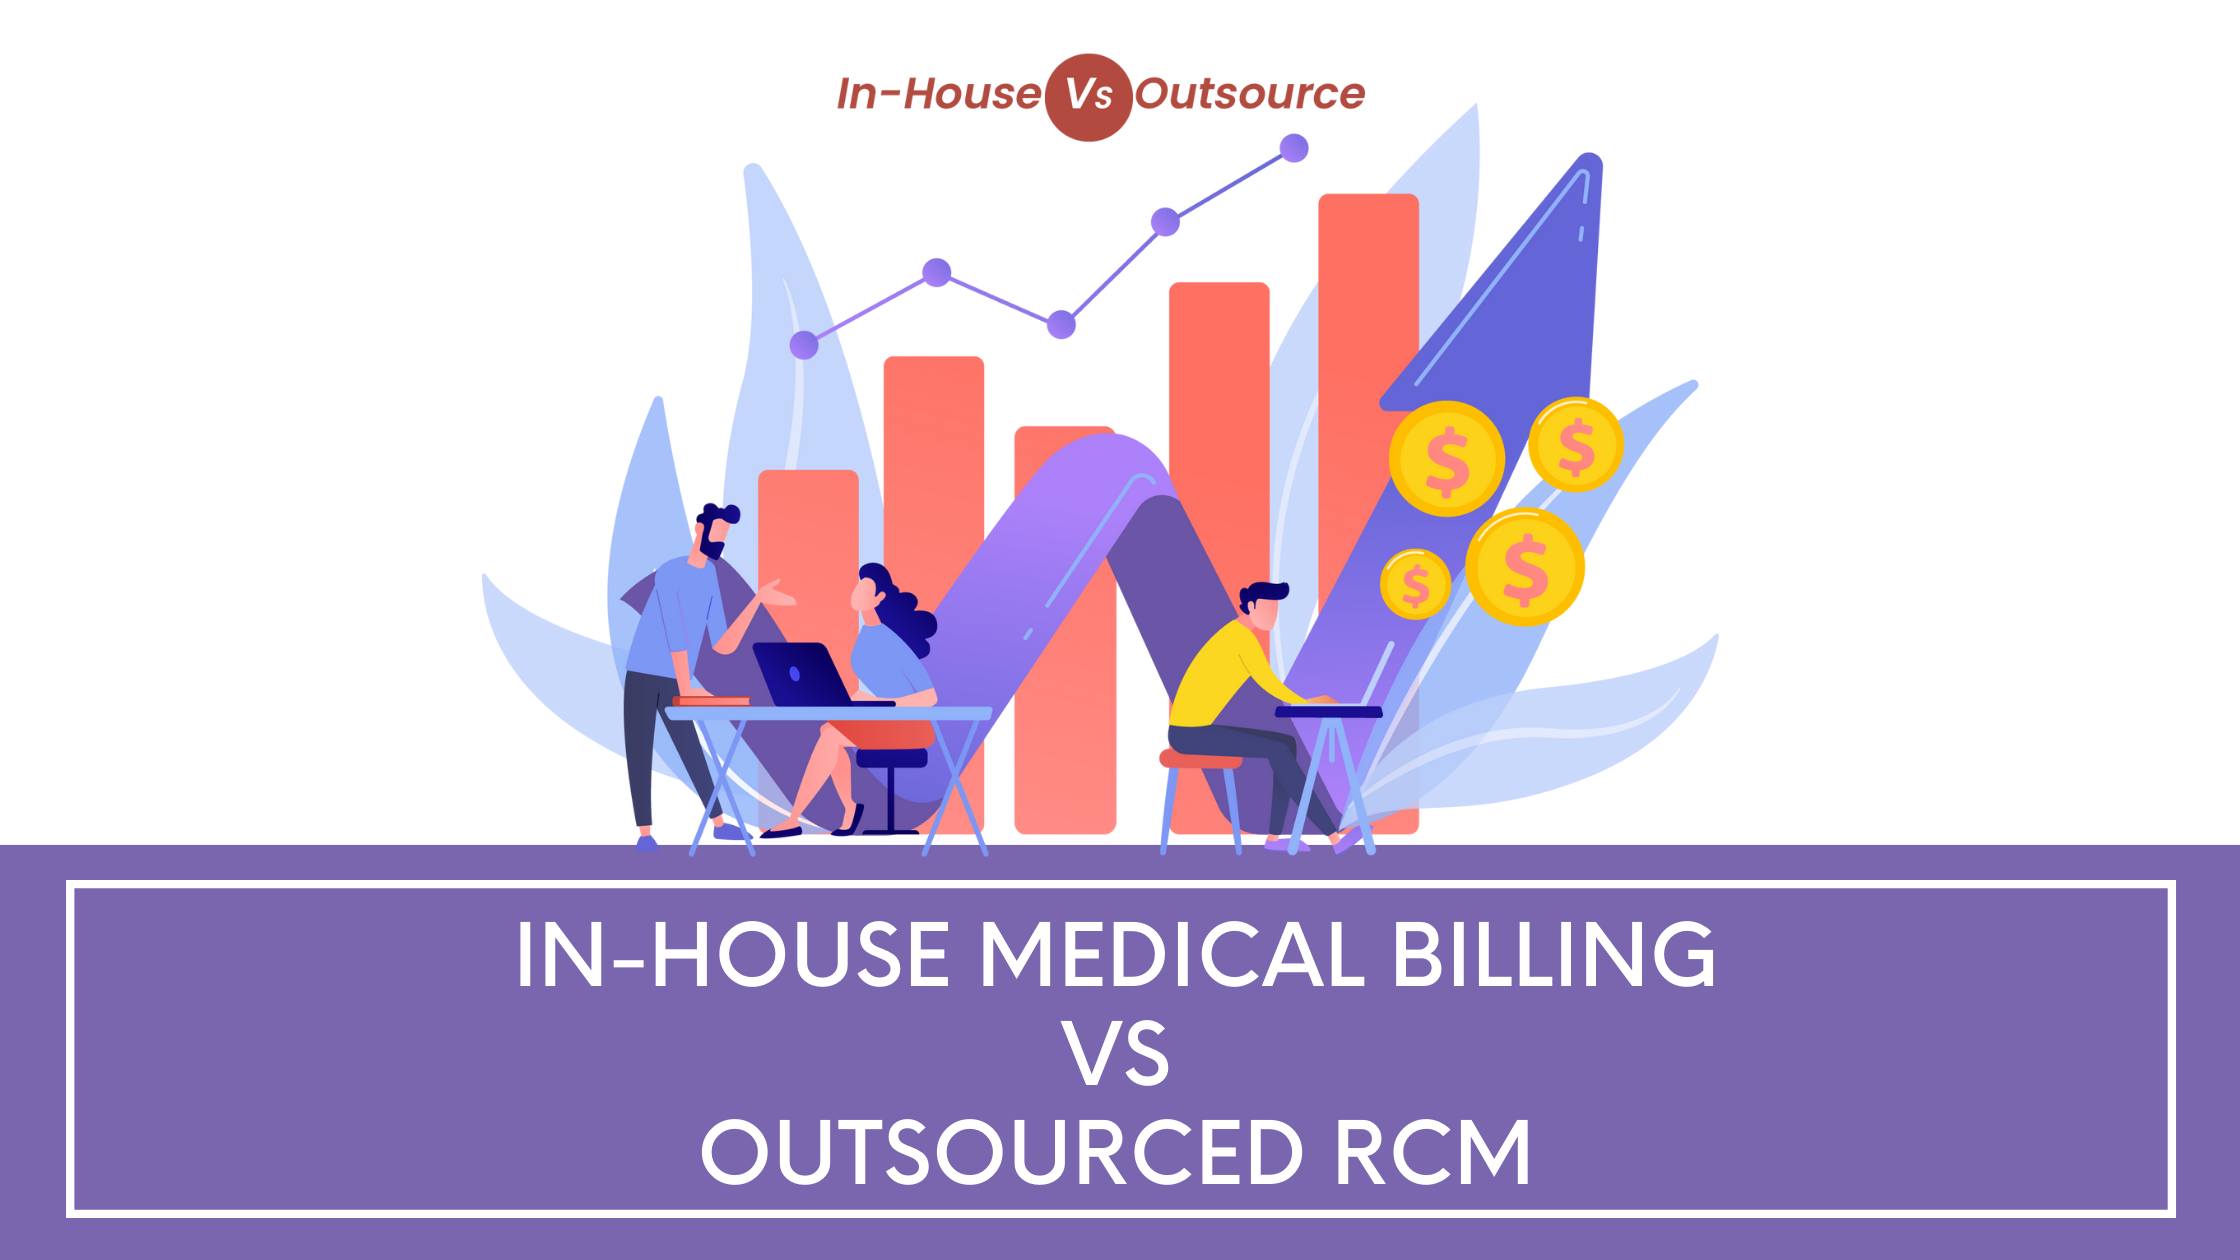 In-house-vs-outsource-medical-billing